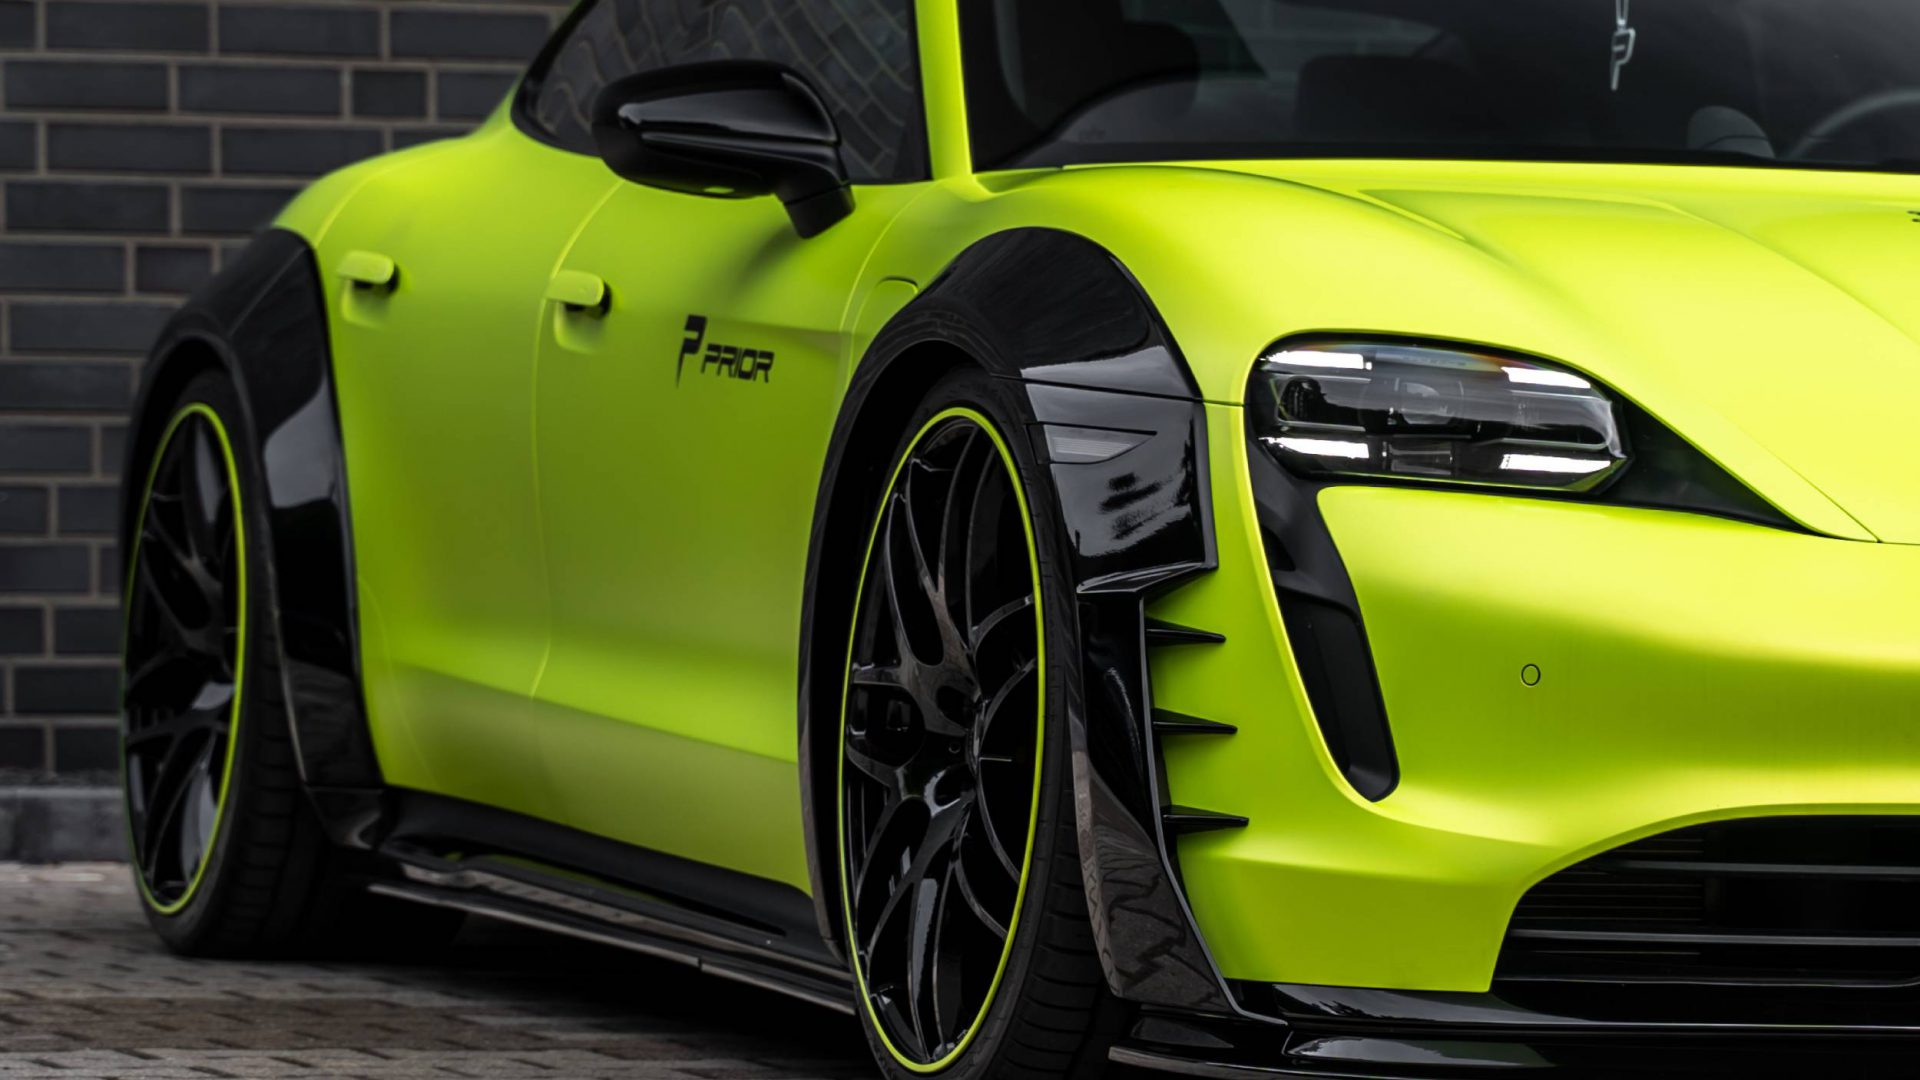 Check our price and buy Prior Design PD TE widebody kit for Porsche Taycan!